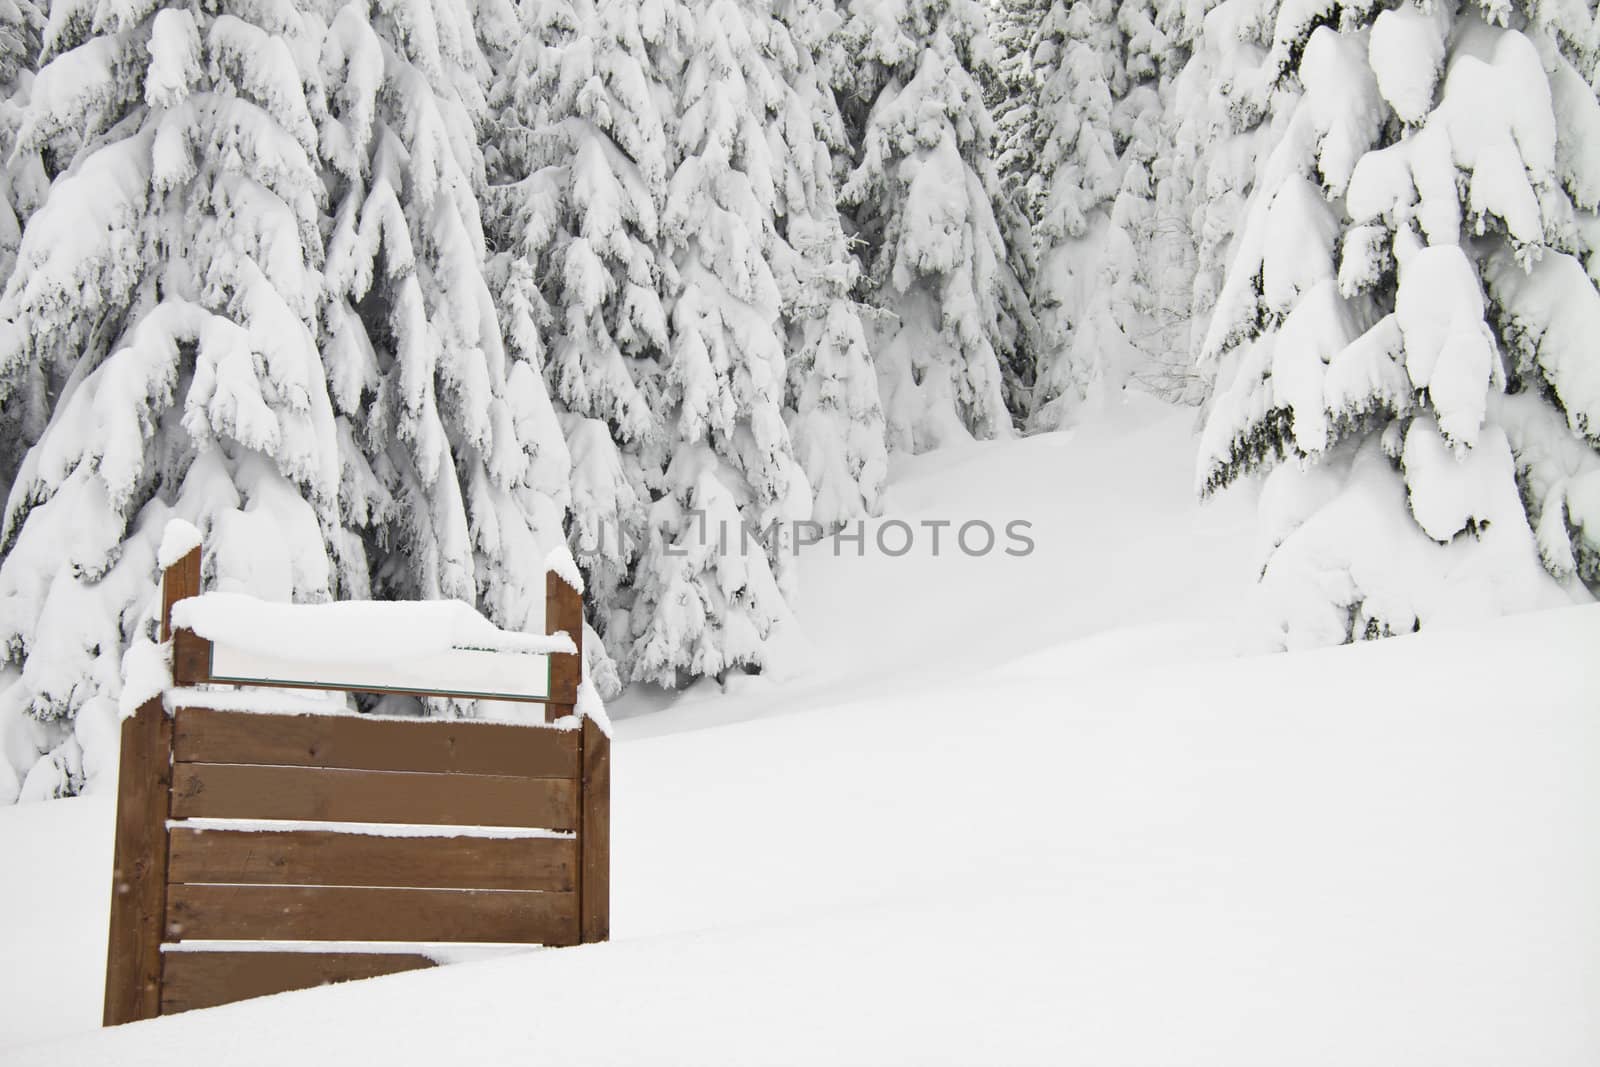 Fir trees with lots of snow and a sign on left, horizontal